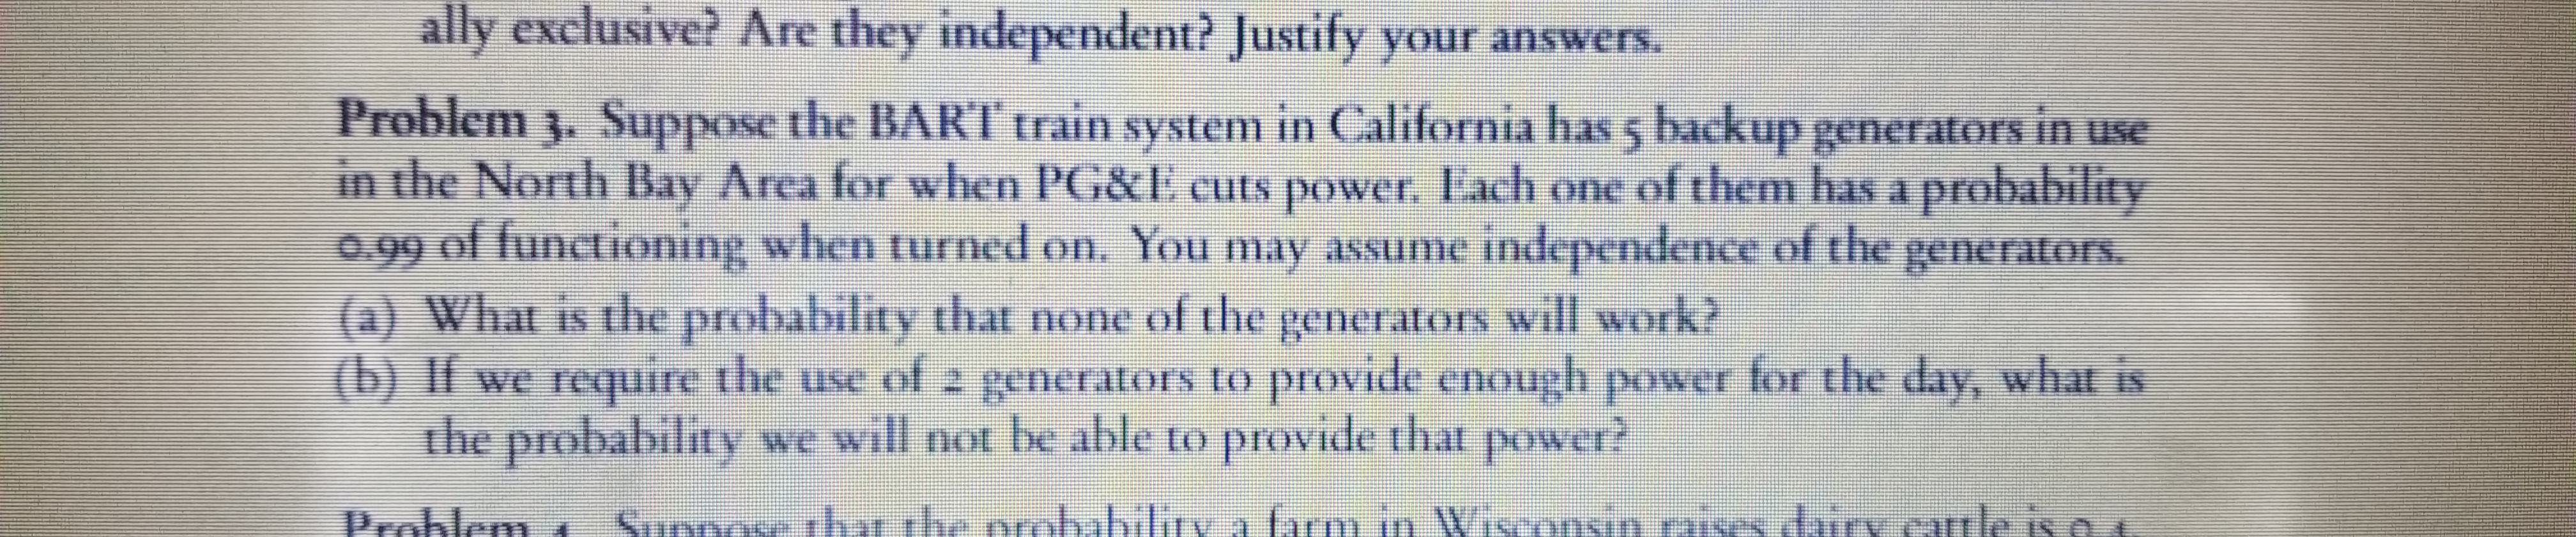 ally exclusive? Are they independent? Justify your answers.
Problem 3. Suppose the BART train system in California has 5 backup generators in
in the North Bay Area for when PG&E cuts power. Each one of them has a probability
0.99 of functioning when turned on. You may assume independence of the
(a) What is the probability that none of the
(b) if we require the use of 2 generators to provide enough power for the day, what is
the
use
DO
generators.
will work?
kenerators
probability we will not be able to provide that power?
Stese thar the probabiliiv.a farmin Wisonsinaises diiry camle is o a
Problem
